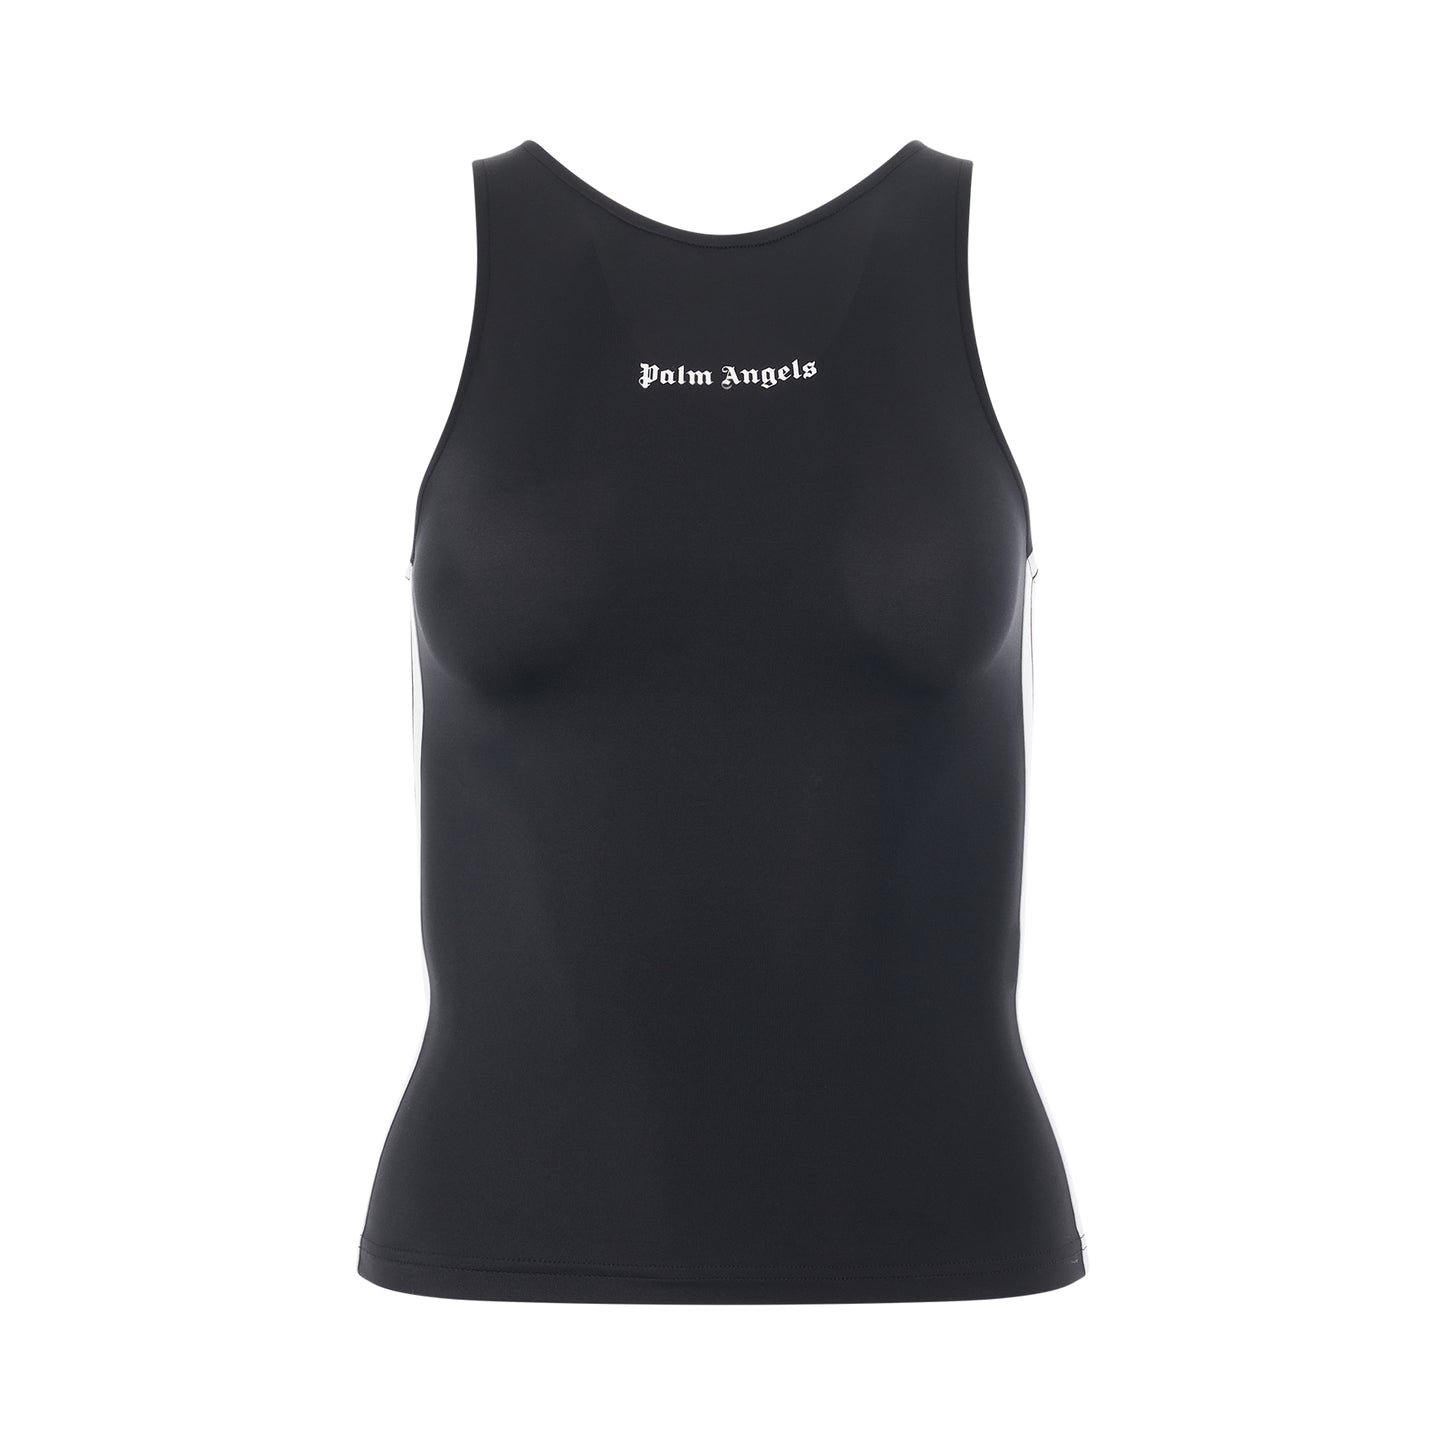 Track Active Tank Top in Black/White